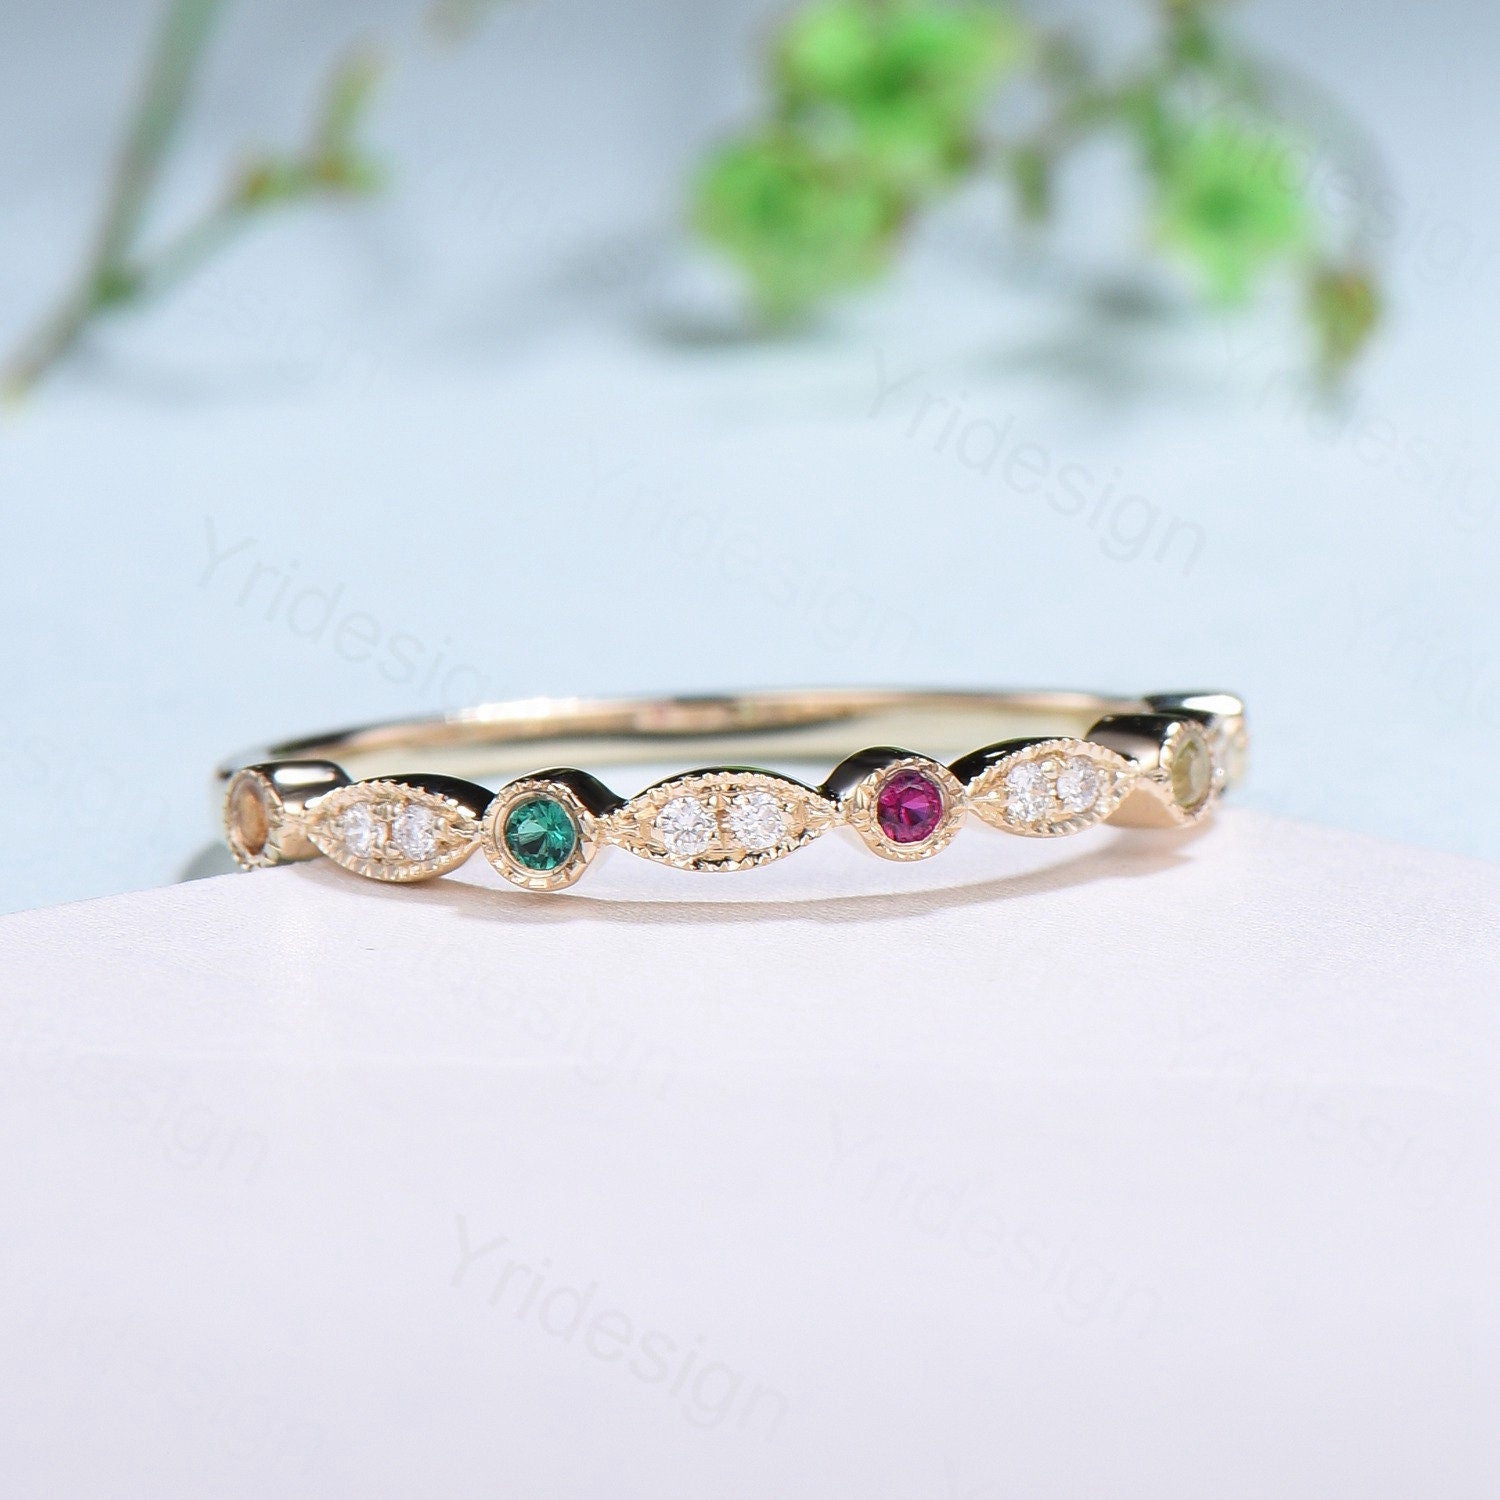 Vintage Half Eternity Diamond Wedding Band Unique Peridot Ruby Emerald Citrine Pink tourmaline  Stackable Matching Ring Anniversary Gift - PENFINE